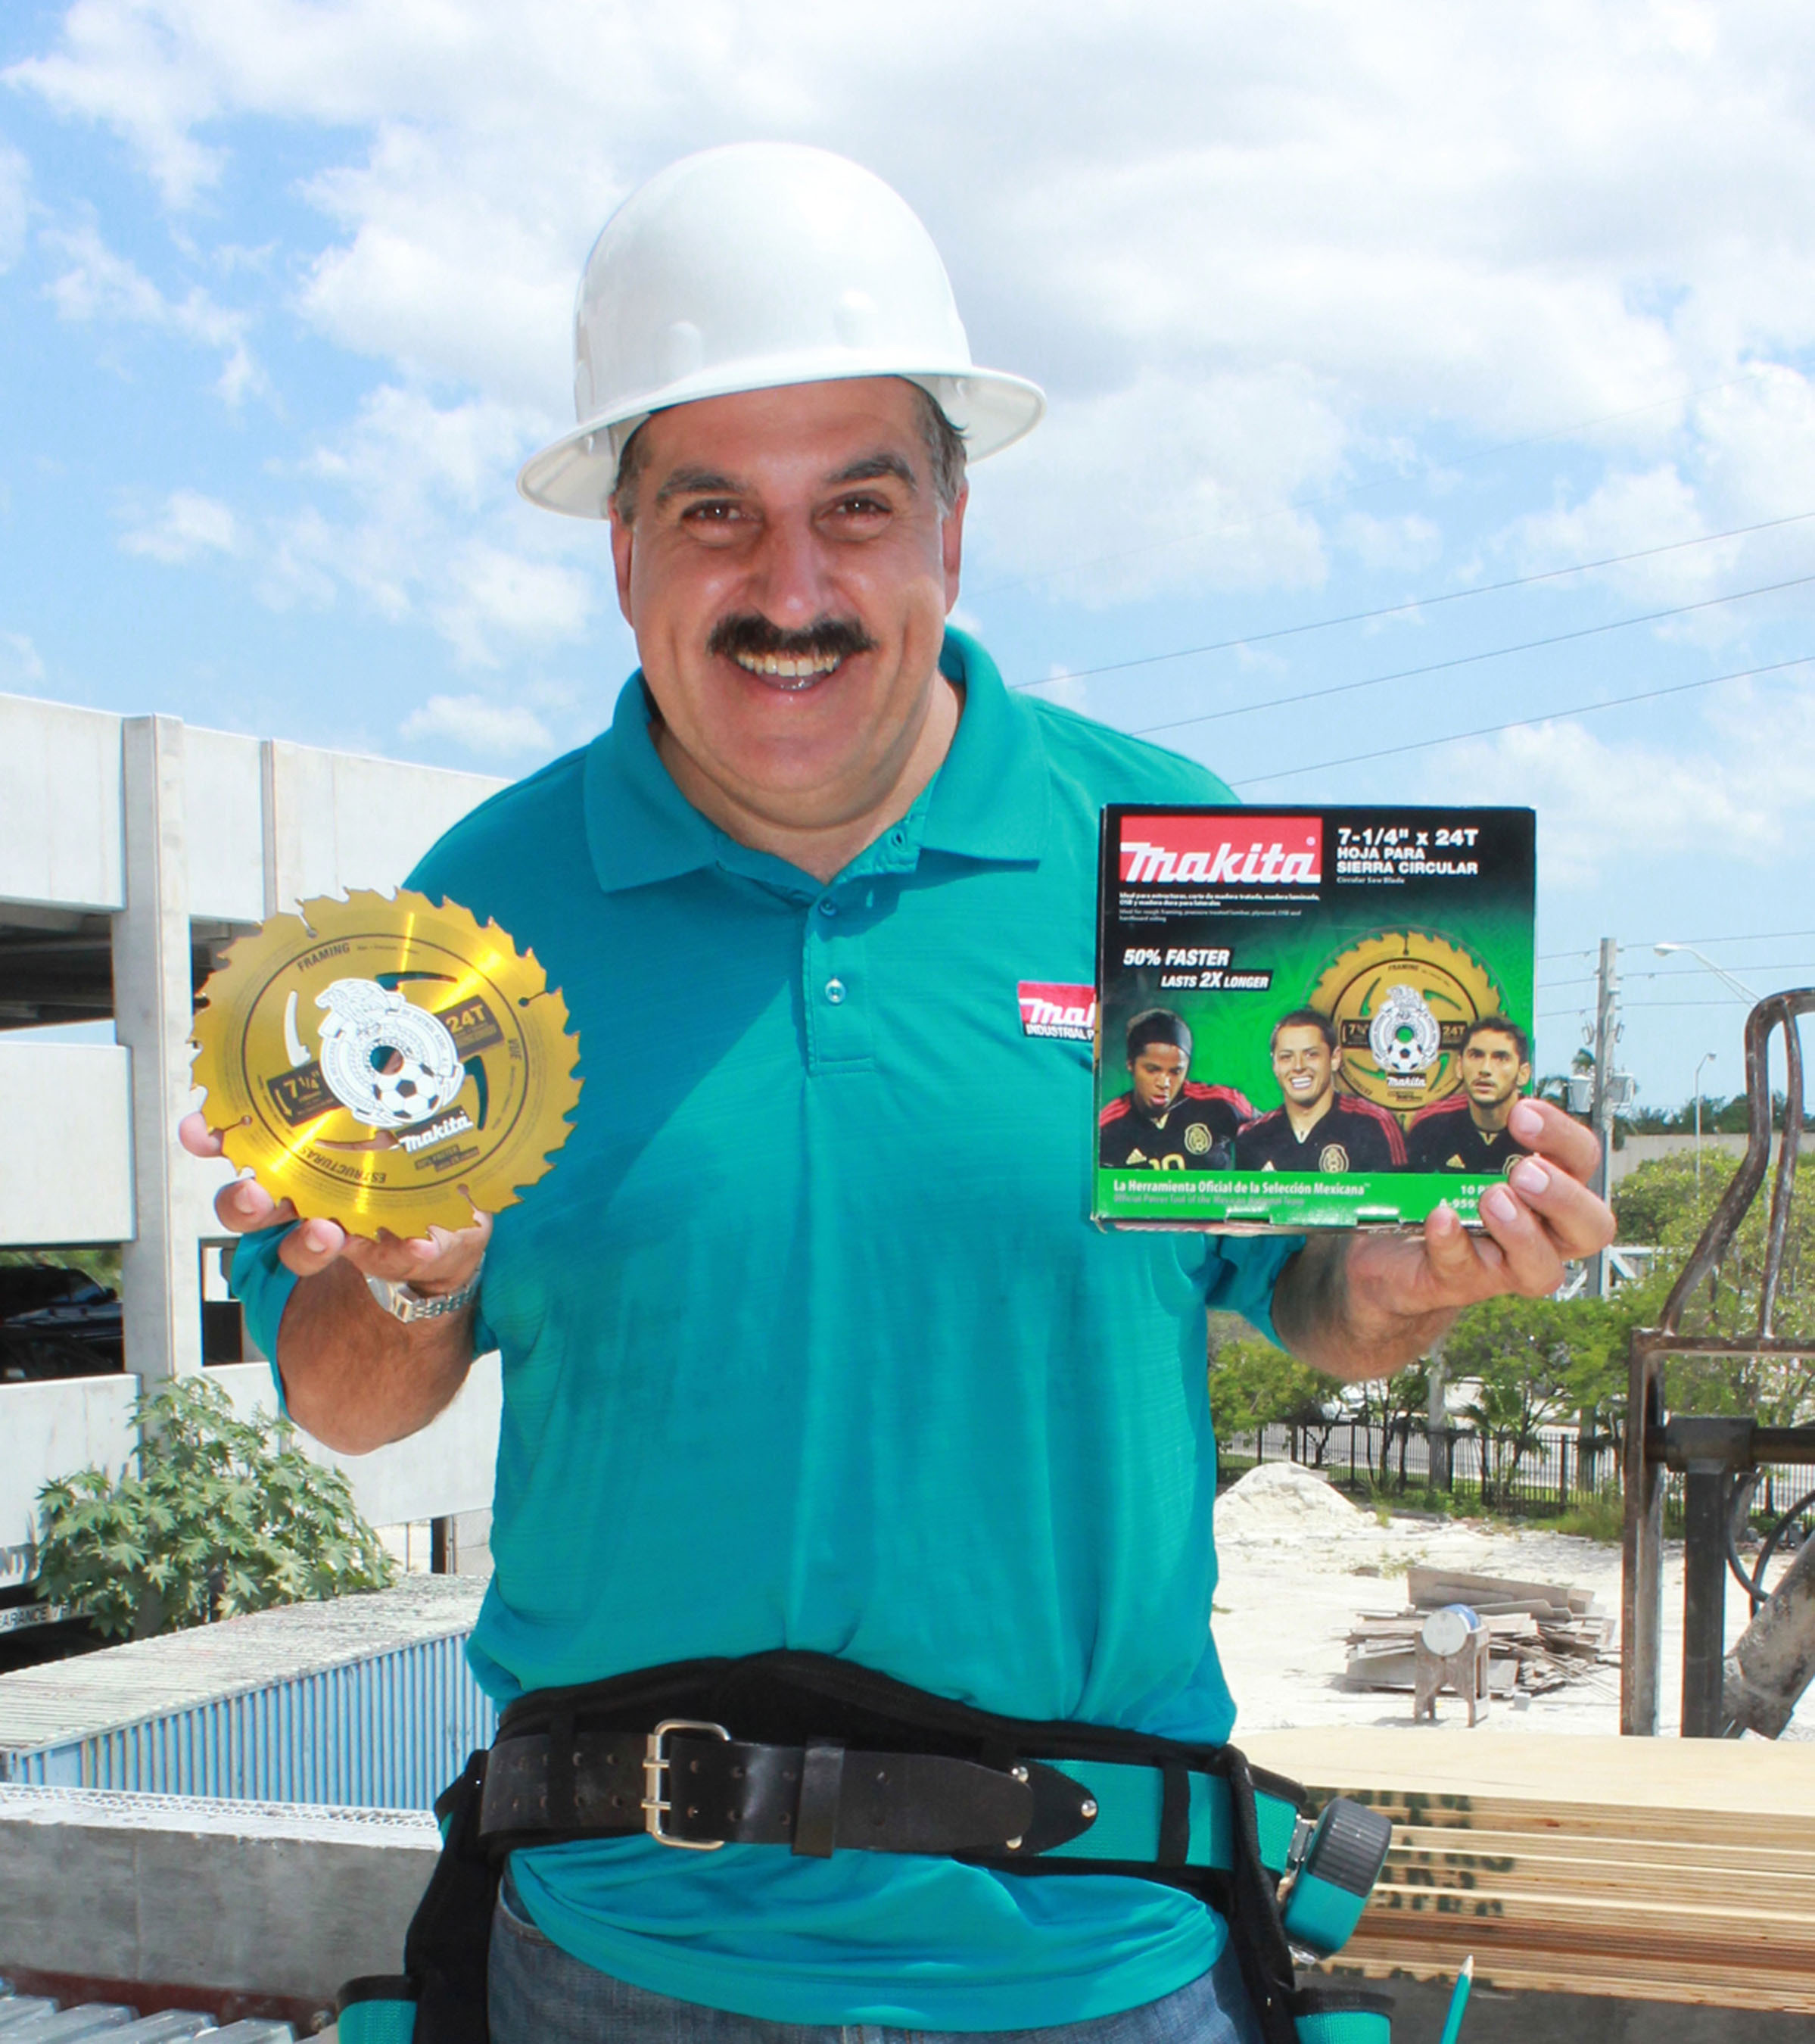 Fernando Fiore, a leading voice in Spanish-language soccer media, on the jobsite with Makita's exclusive 7-1/4" Framing Blade featuring the logo of the Mexican National Soccer Team. (PRNewsFoto/Makita) (PRNewsFoto/MAKITA)